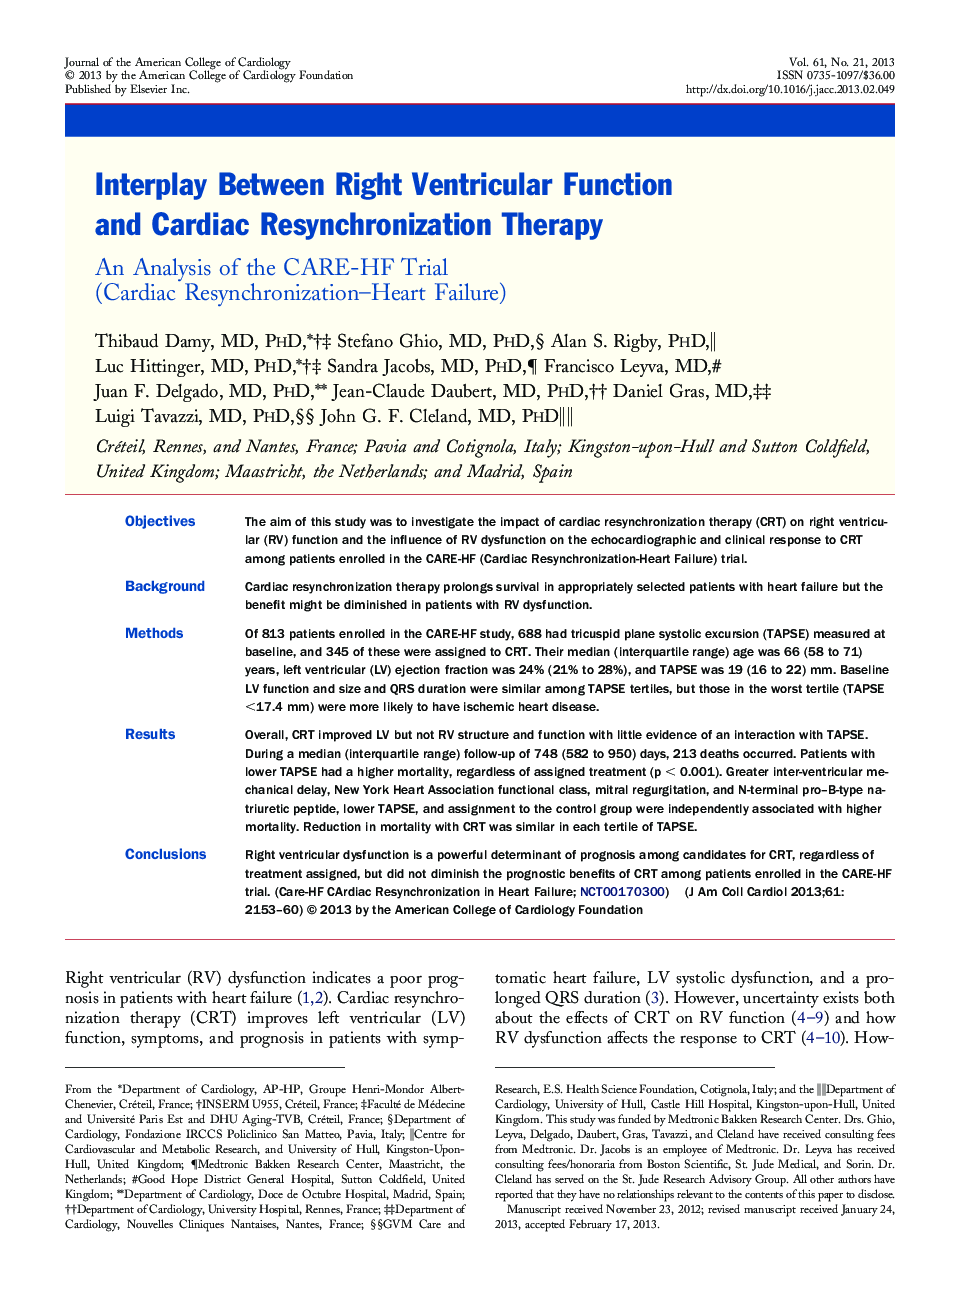 Interplay Between Right Ventricular Function and Cardiac Resynchronization Therapy : An Analysis of the CARE-HF Trial (Cardiac Resynchronization–Heart Failure)